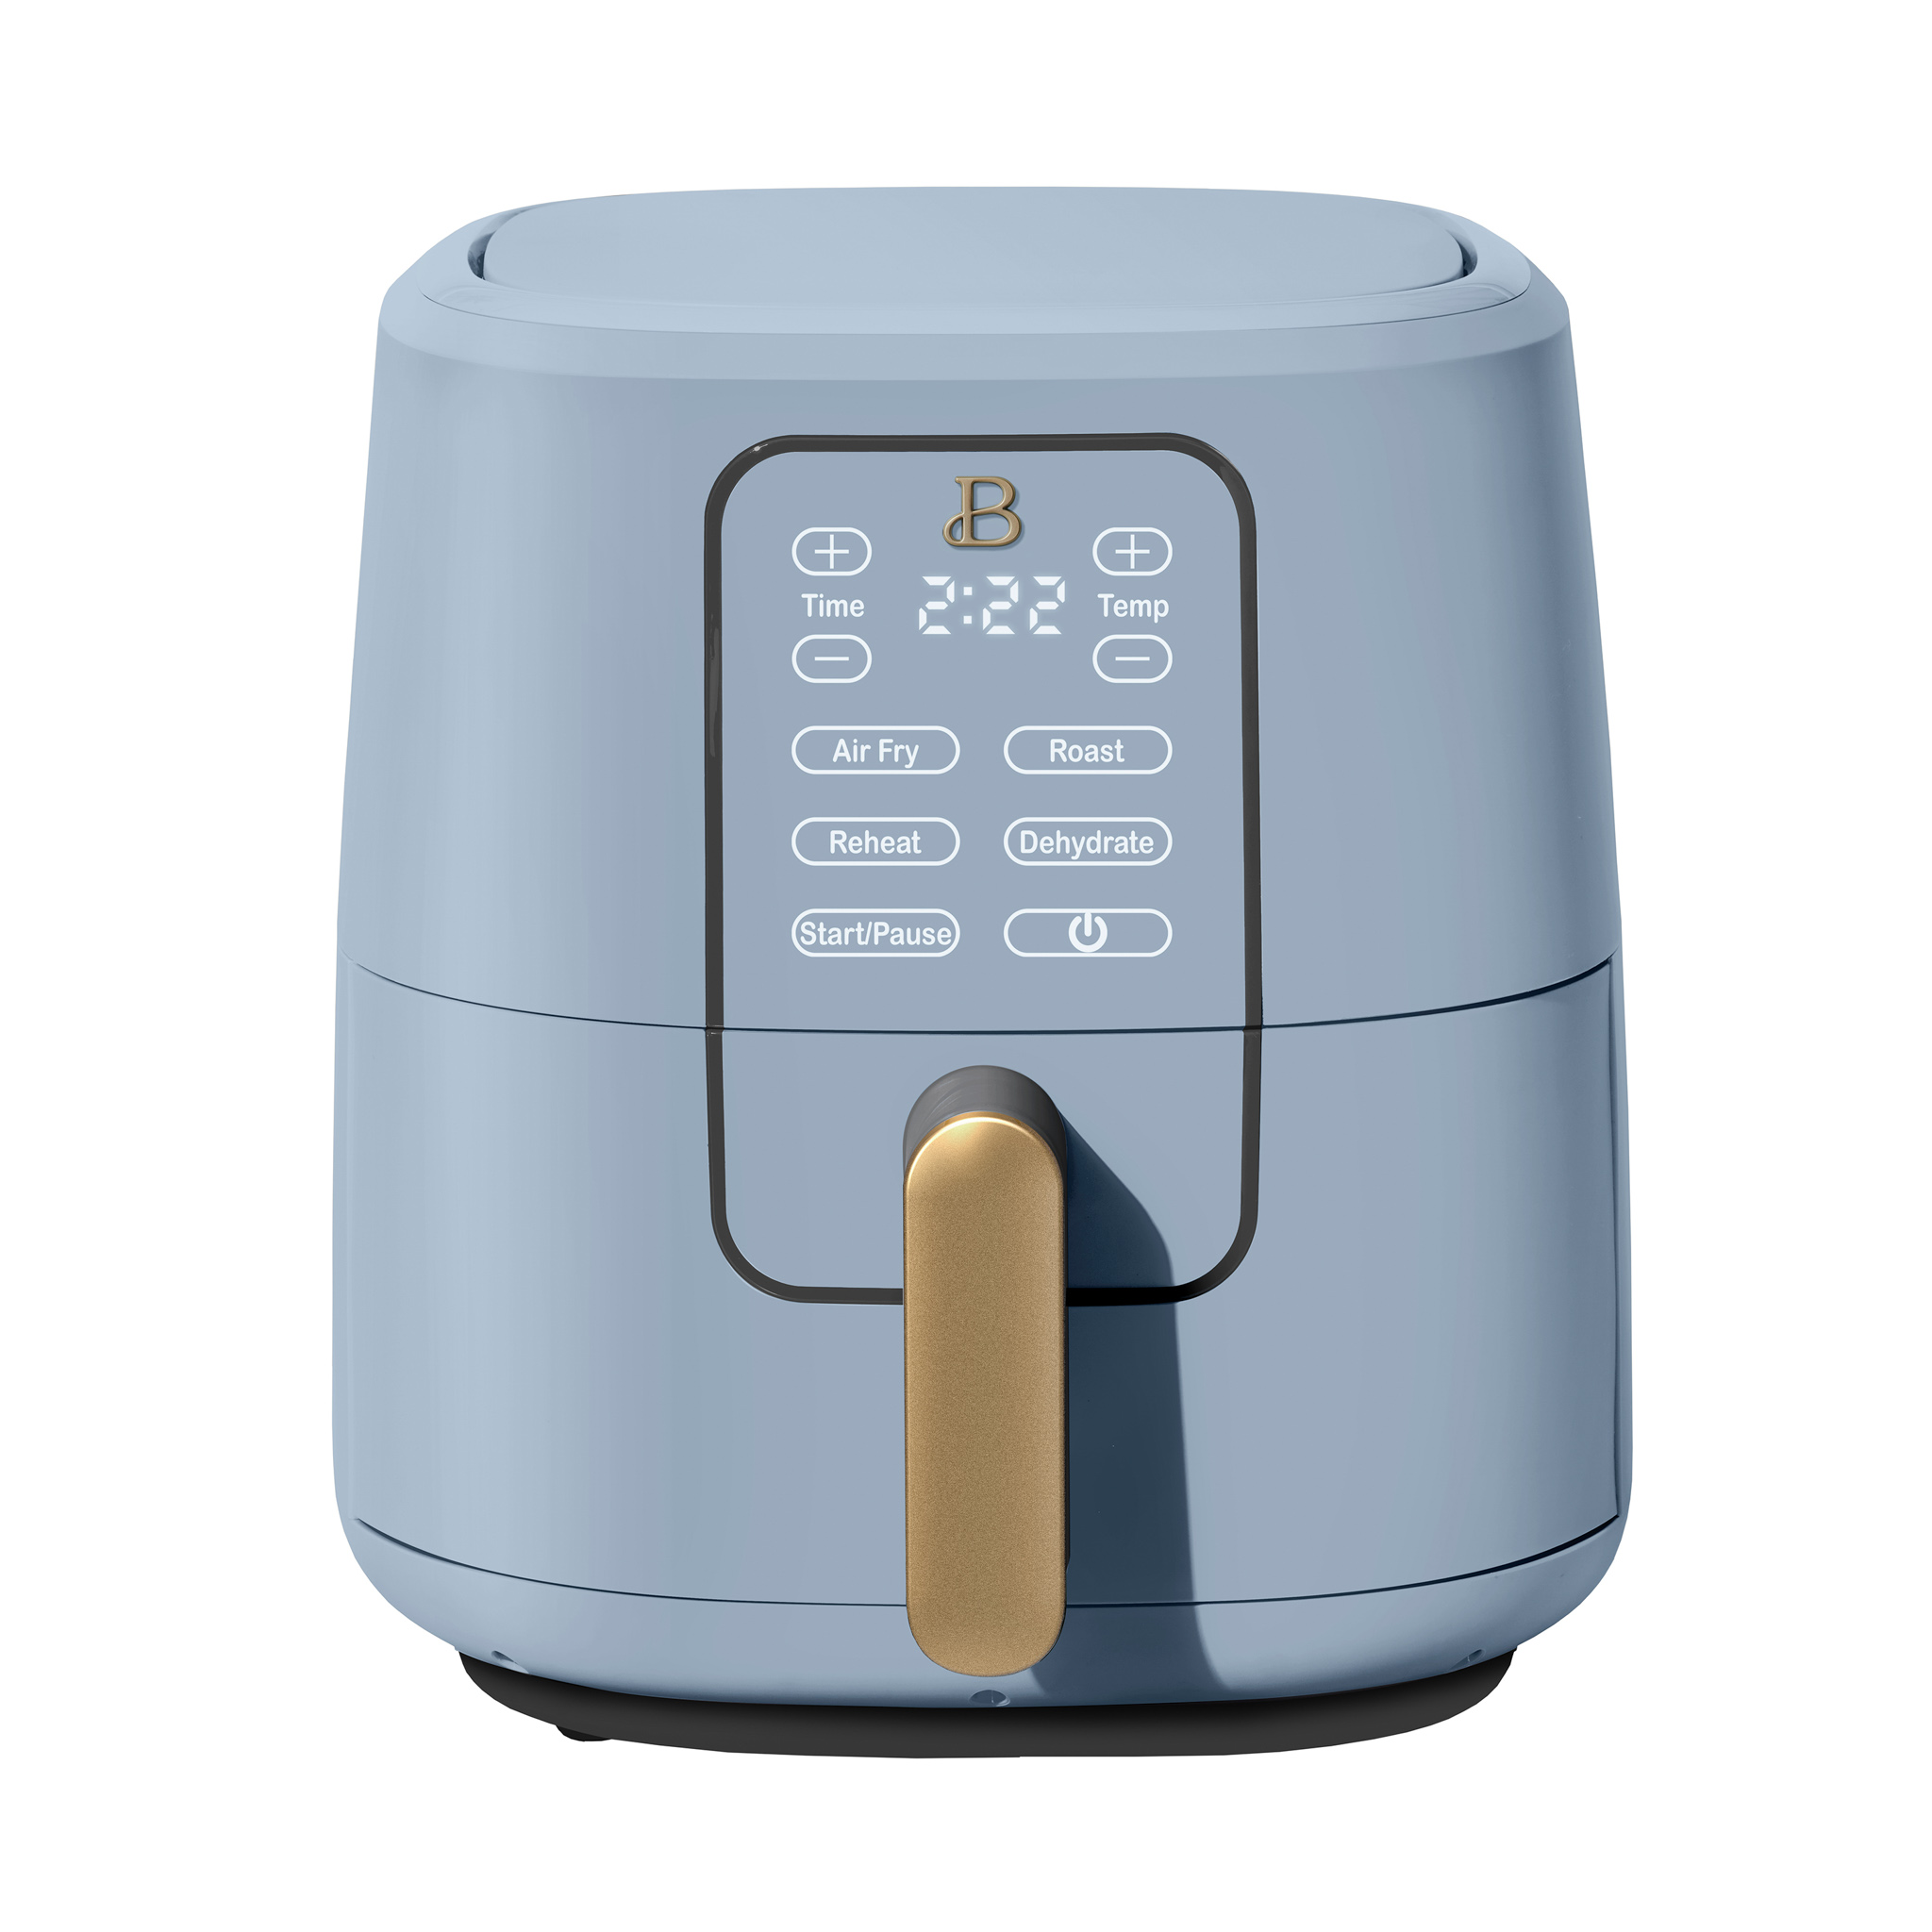 Beautiful 6 Qt Air Fryer with TurboCrisp Technology and Touch-Activated Display, Cornflower Blue by Drew Barrymore - image 1 of 8